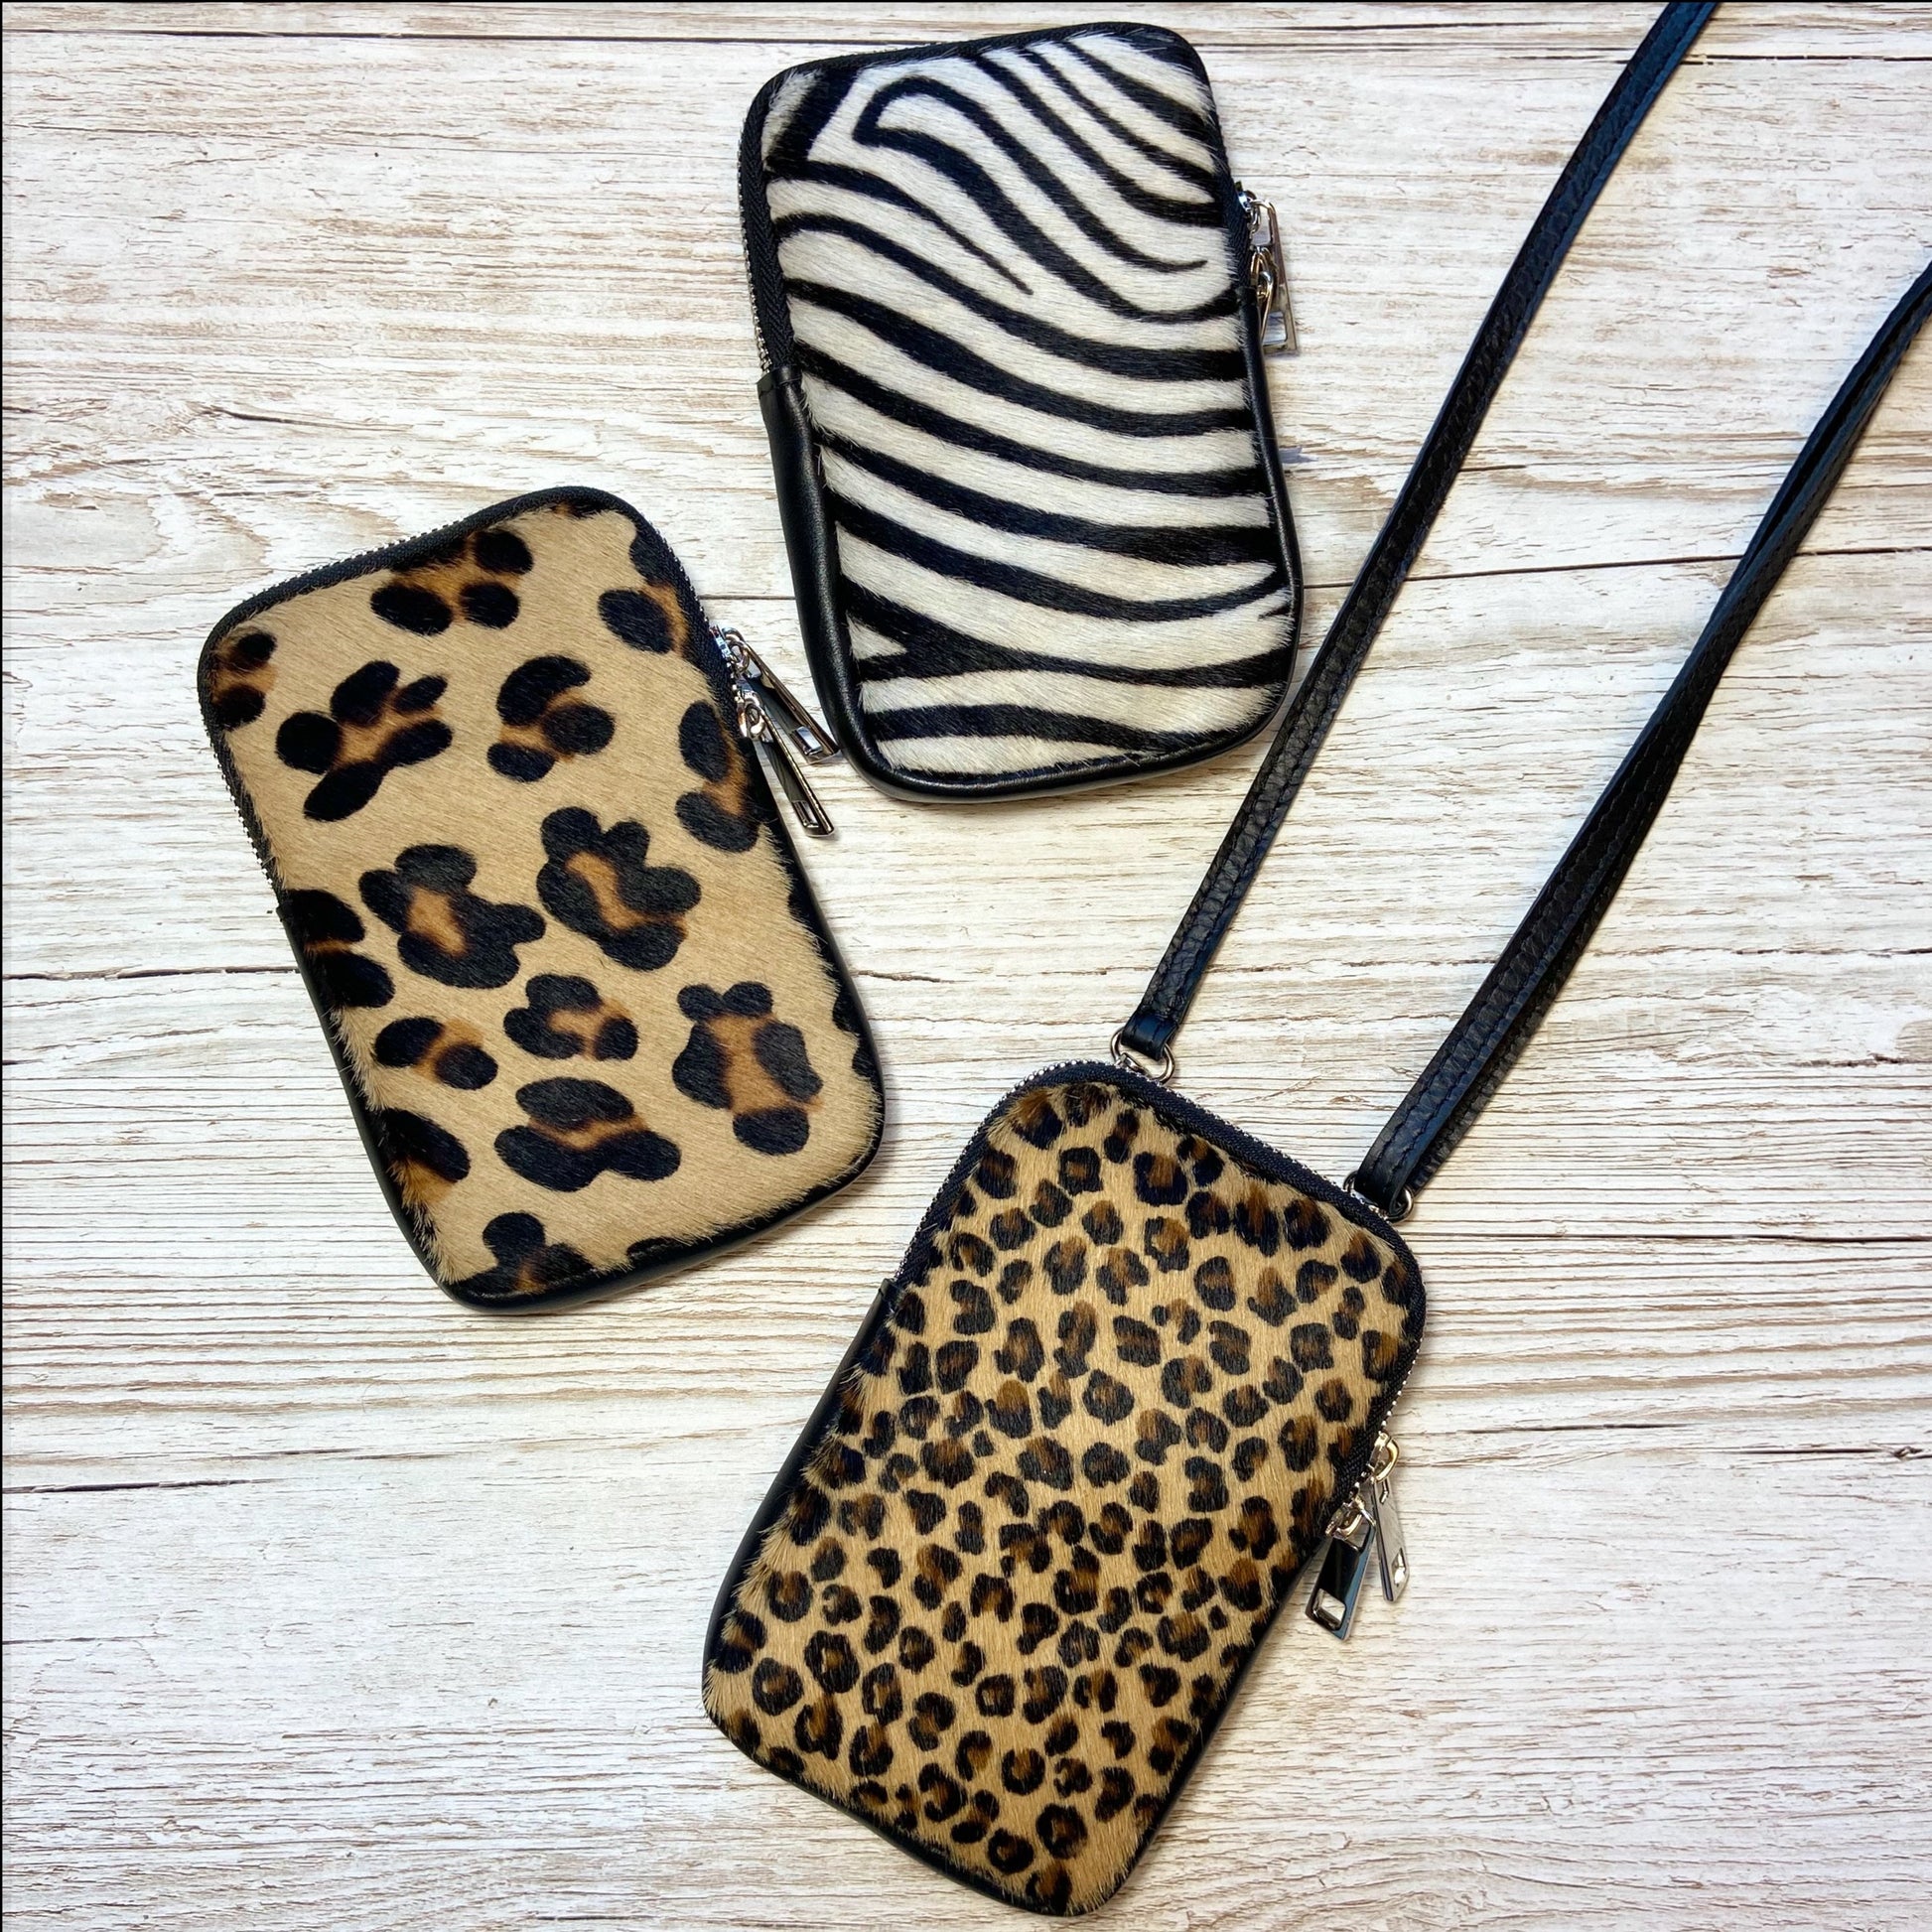 Beautiful cow hair leopard or zebra print leather phone bags, superb quality with silver hardware & double zips. A great size to hold your phone or purse or a couple of essentials without the bulk of a huge bag.